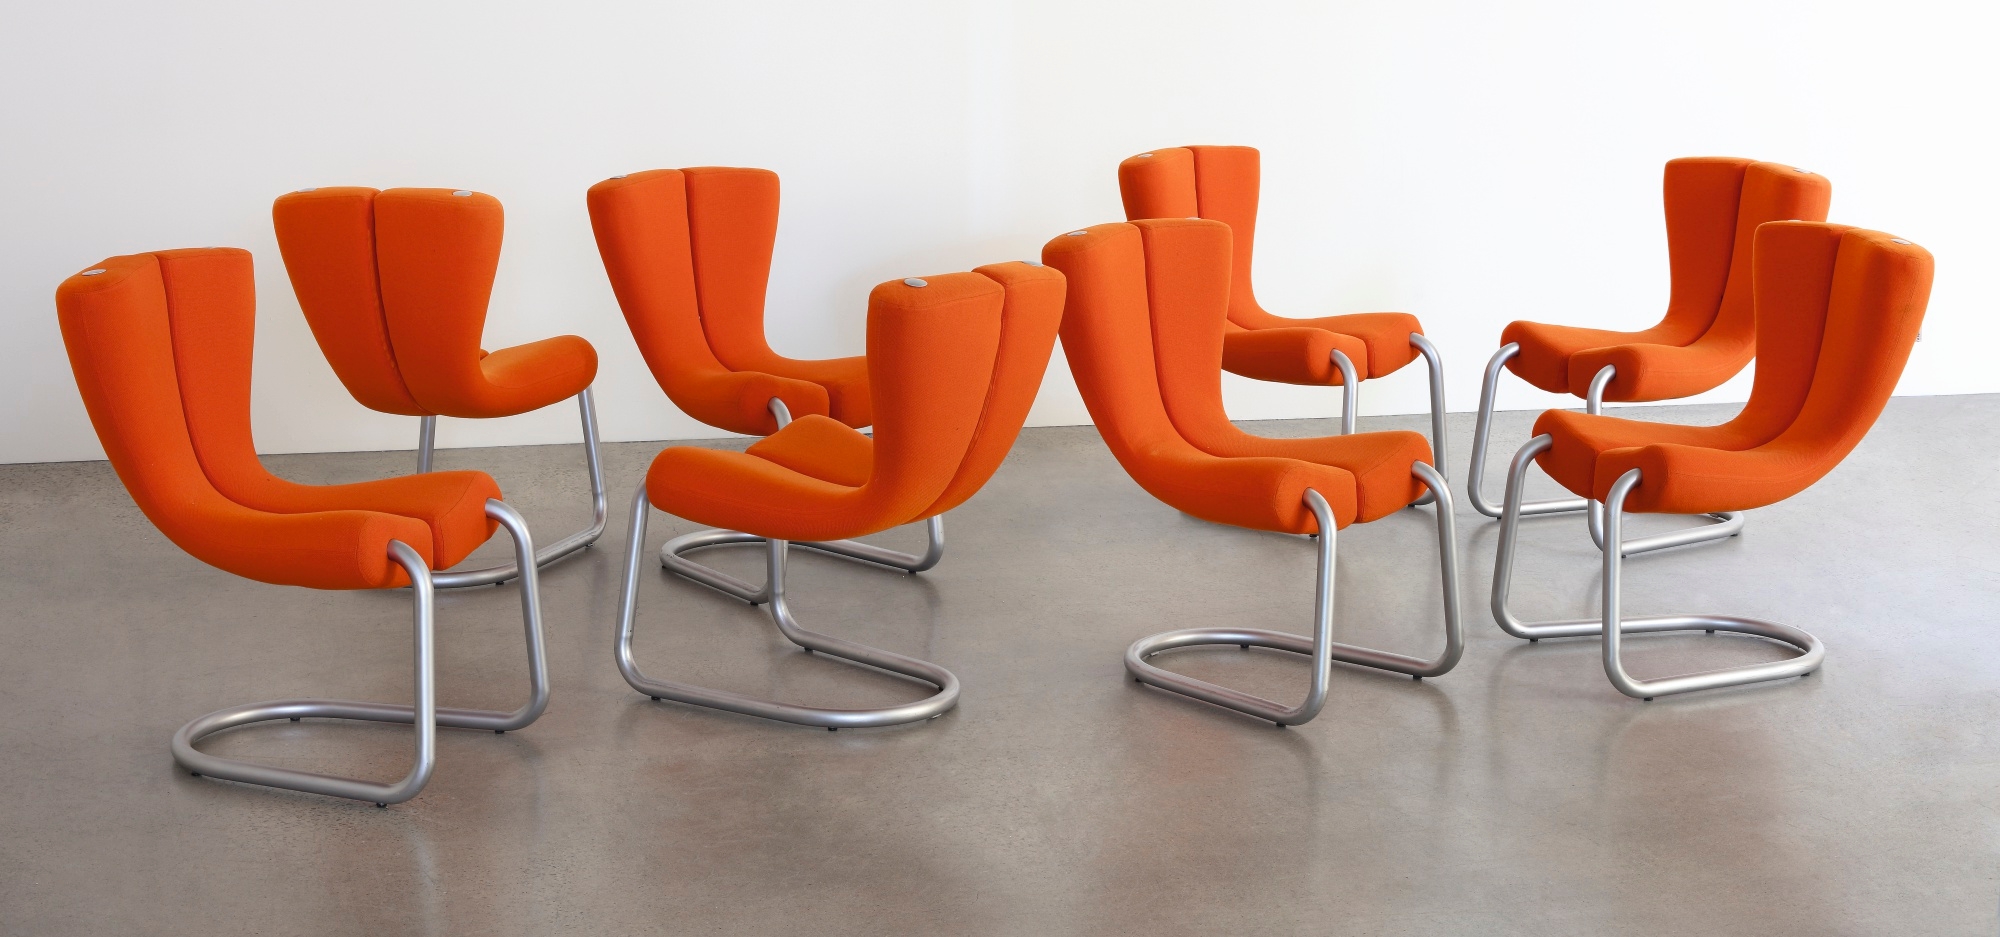 MARC NEWSON, SET OF FOUR KOMED CHAIRS, Design, 20th Century Design